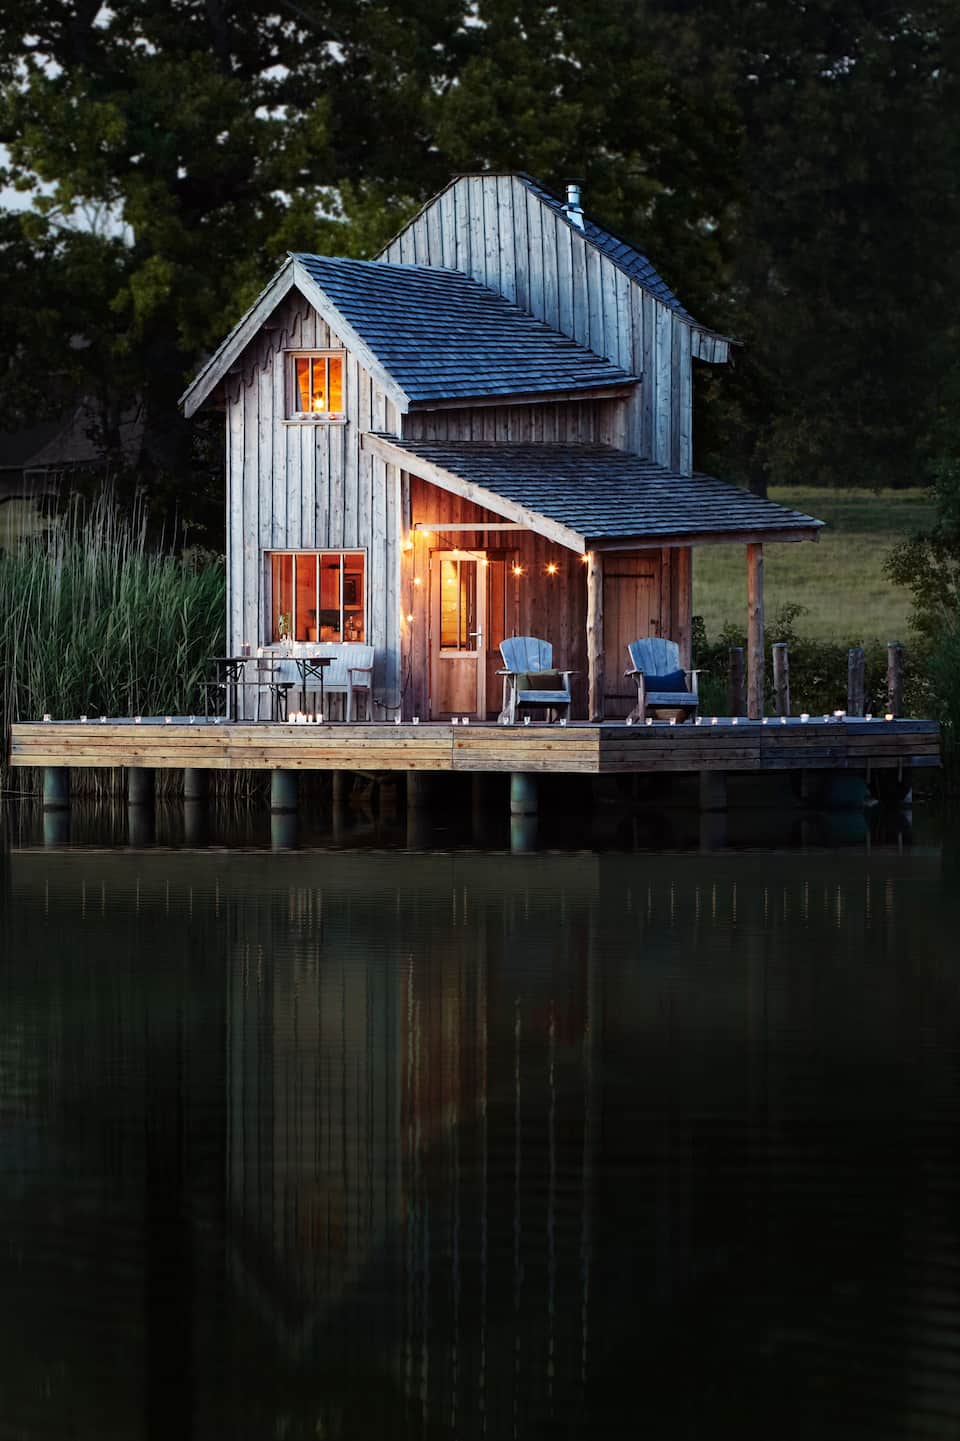 Lake house vacation rentals, Lakefront cabins | Airbnb